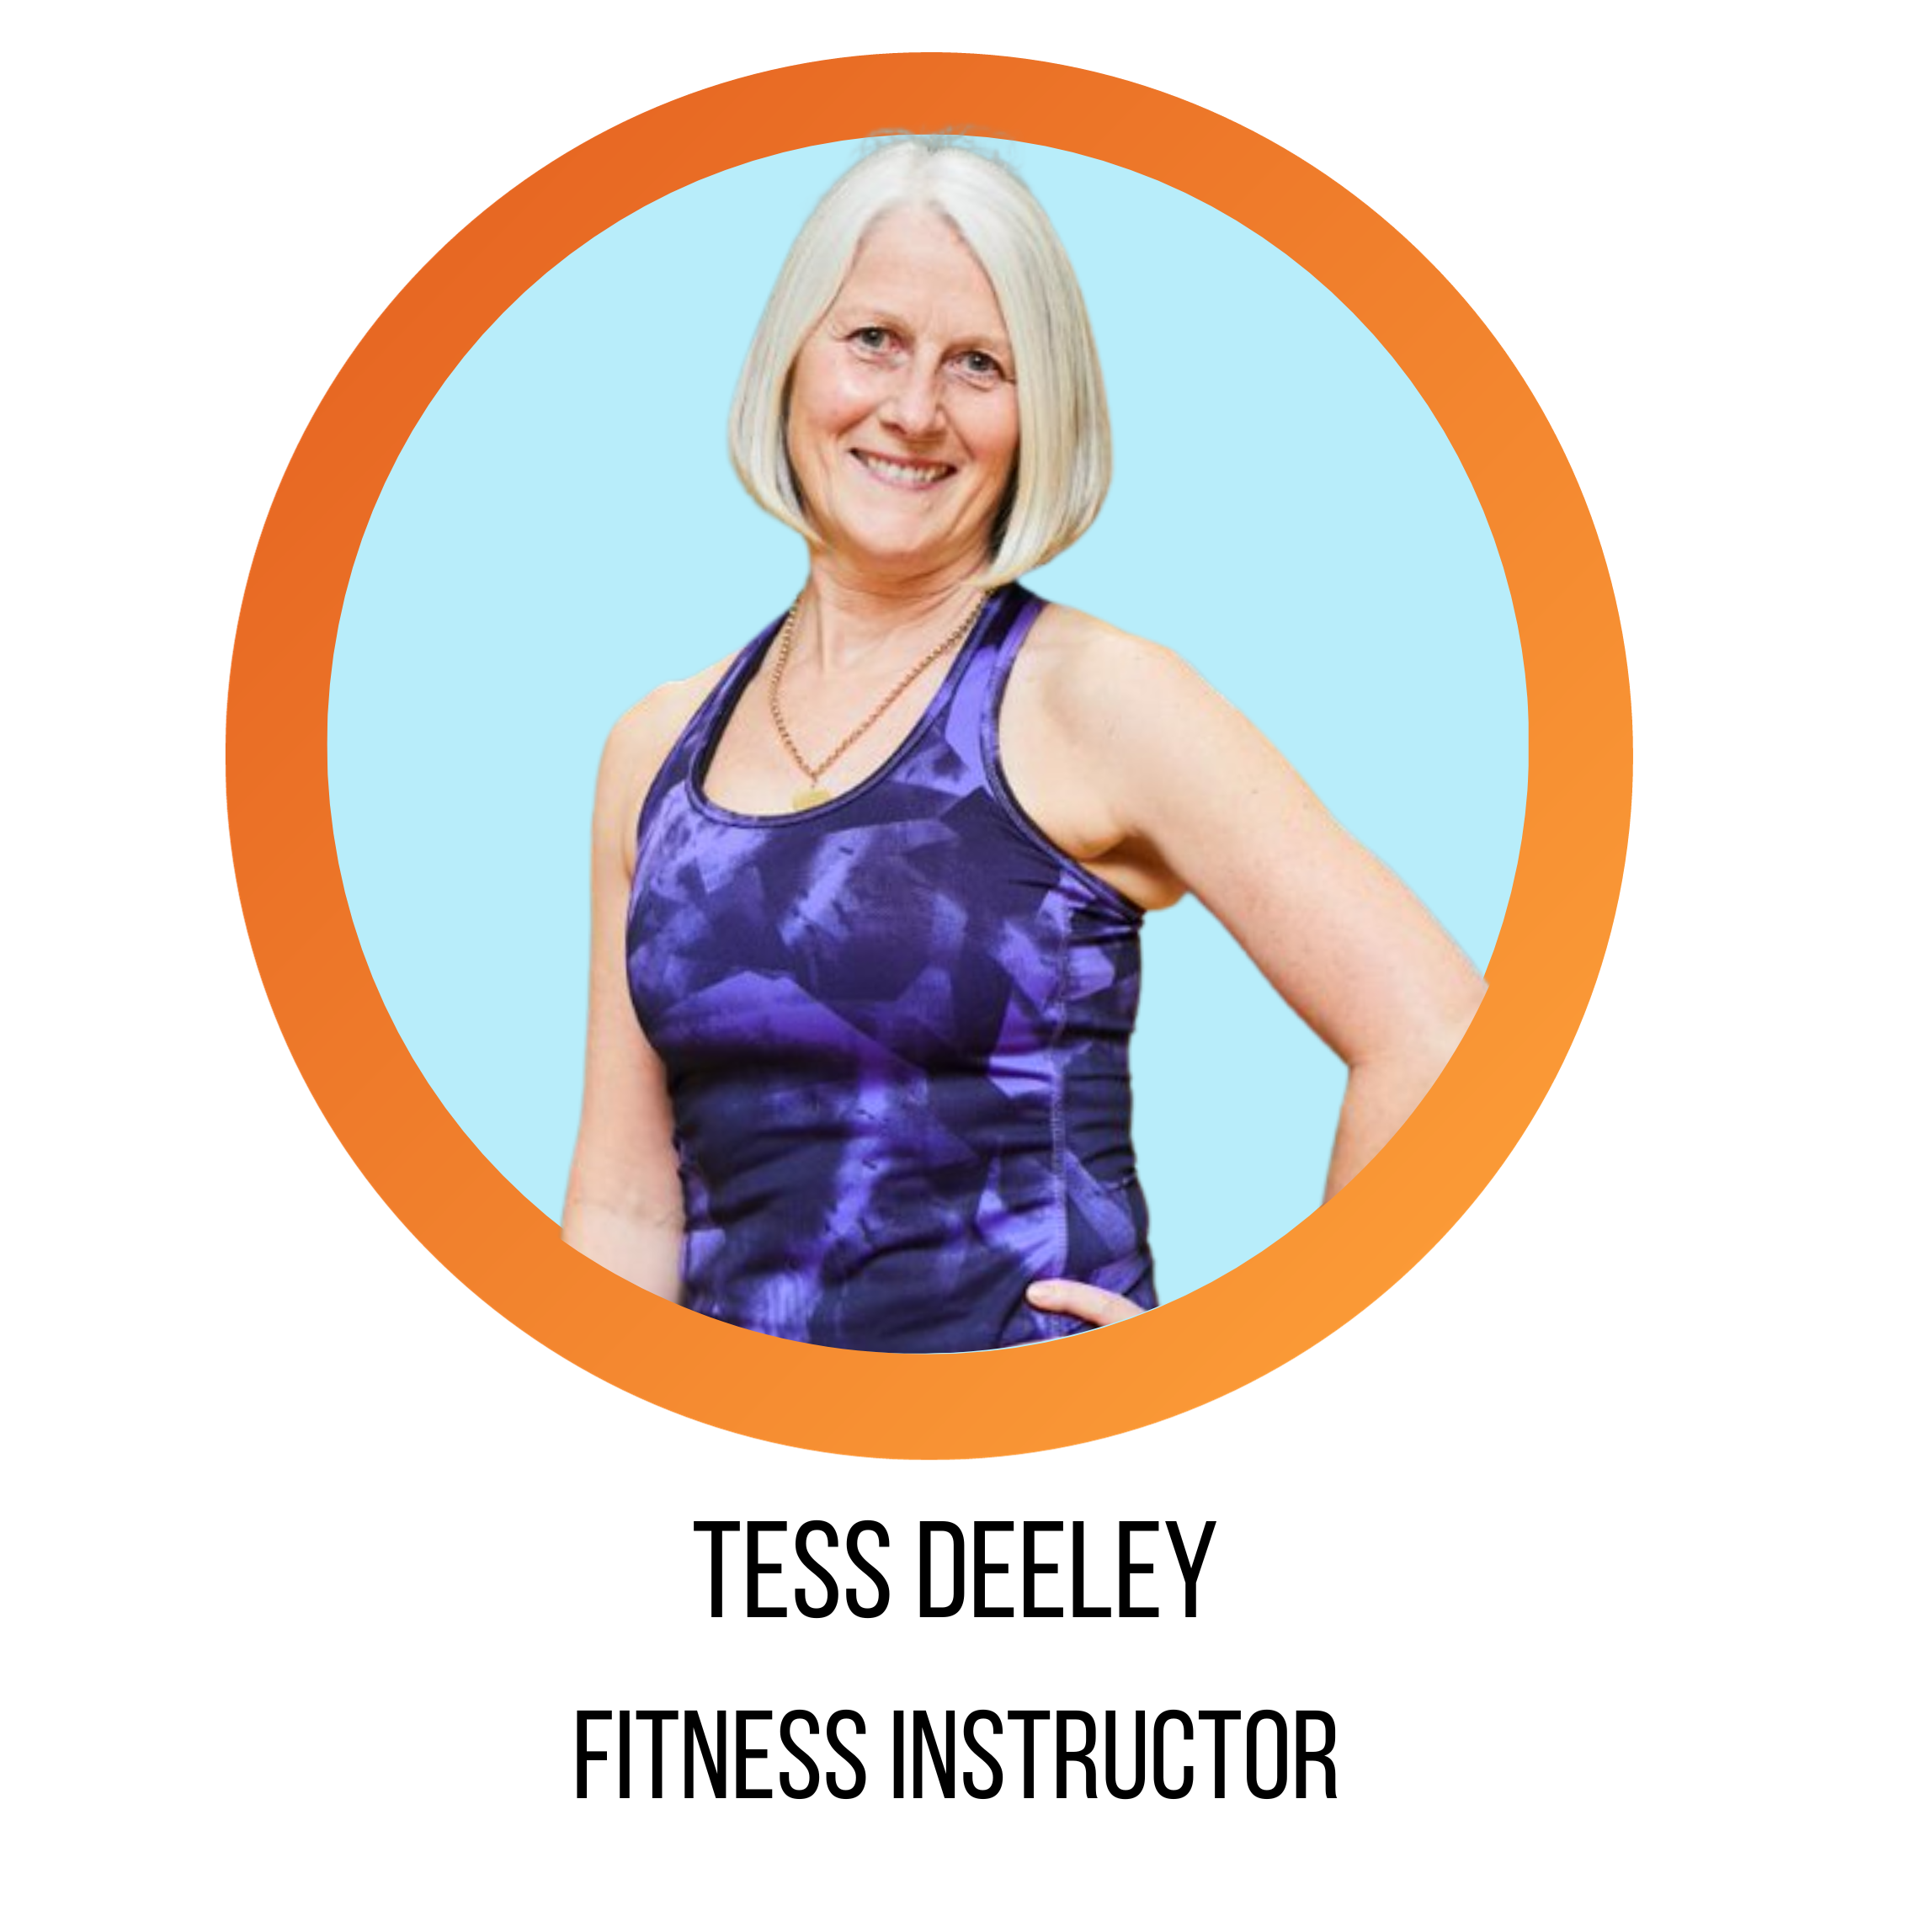 tess deeley, fitness instructor, smiling in front of a blue background